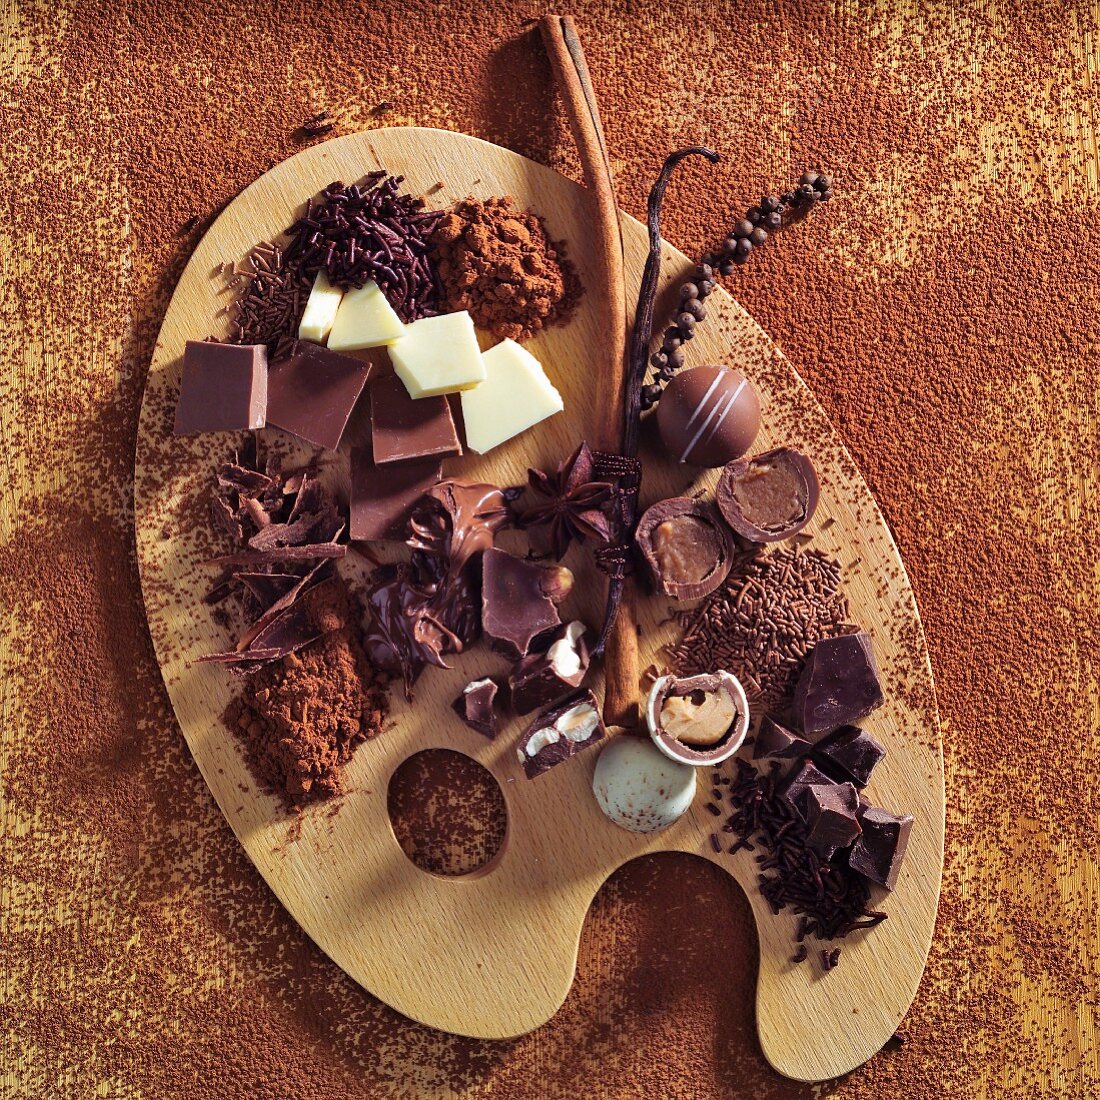 Still life with ingredients for making chocolates